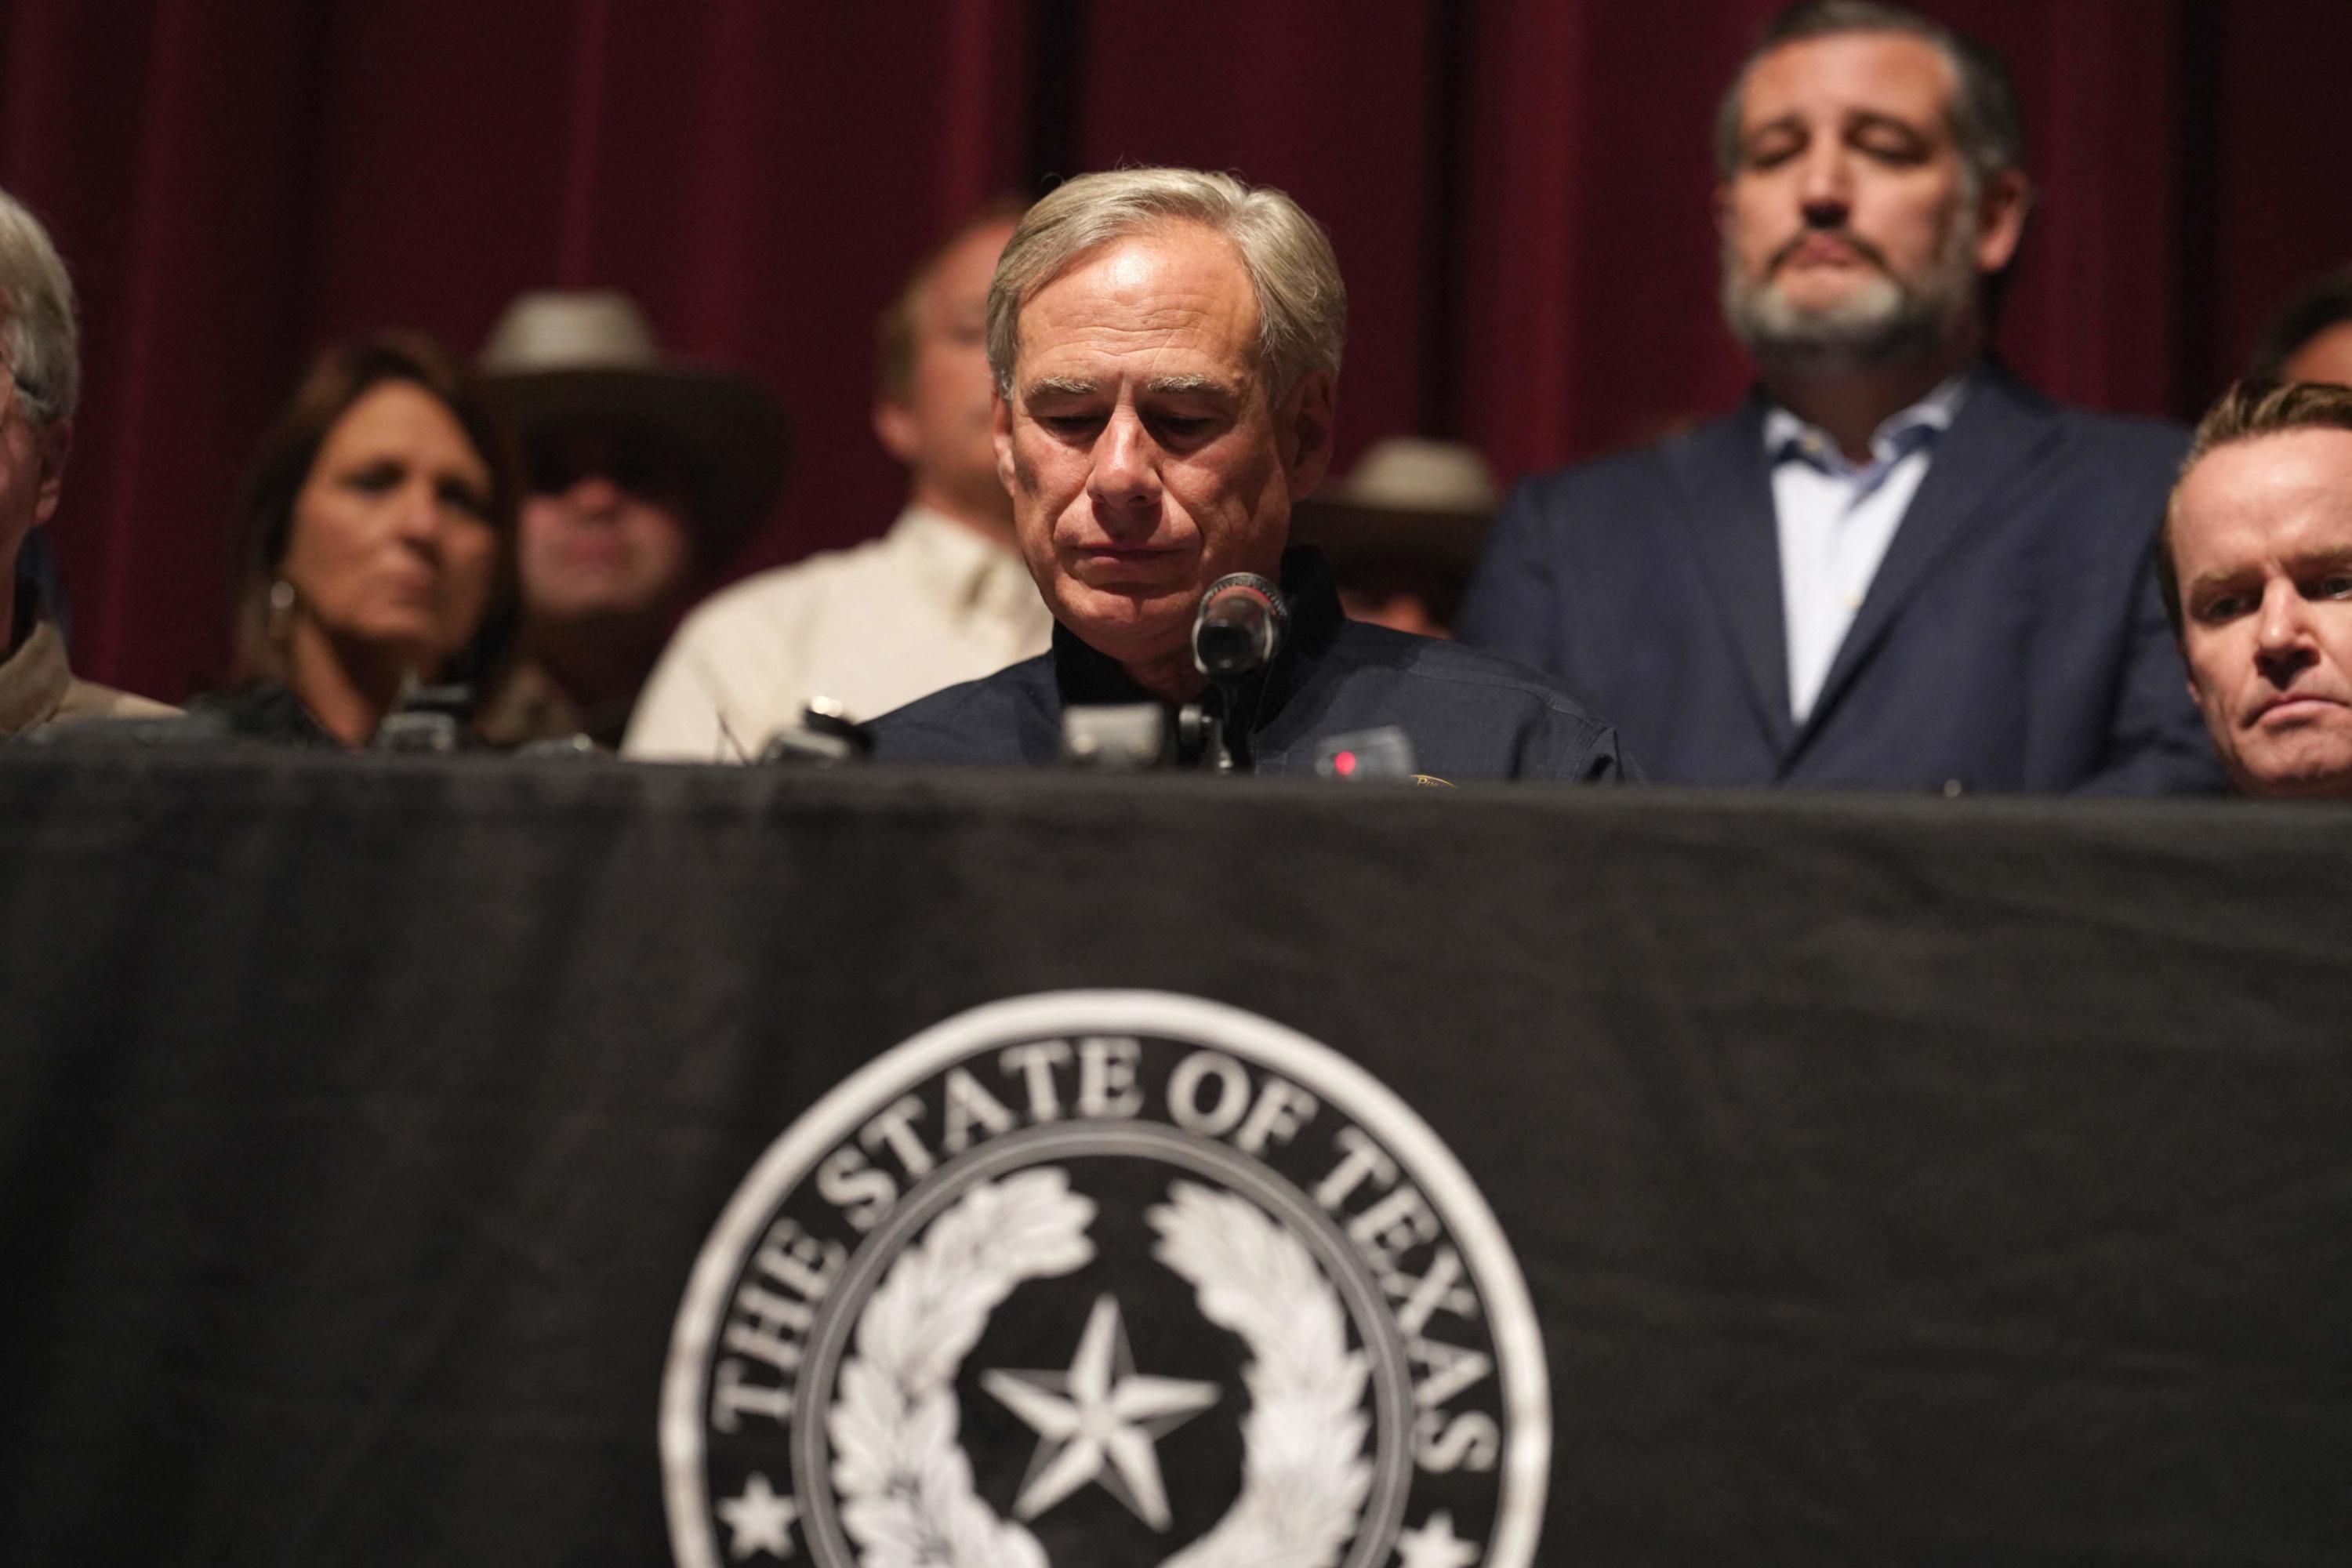 Texas Gov. Greg Abbott appears at a press conference